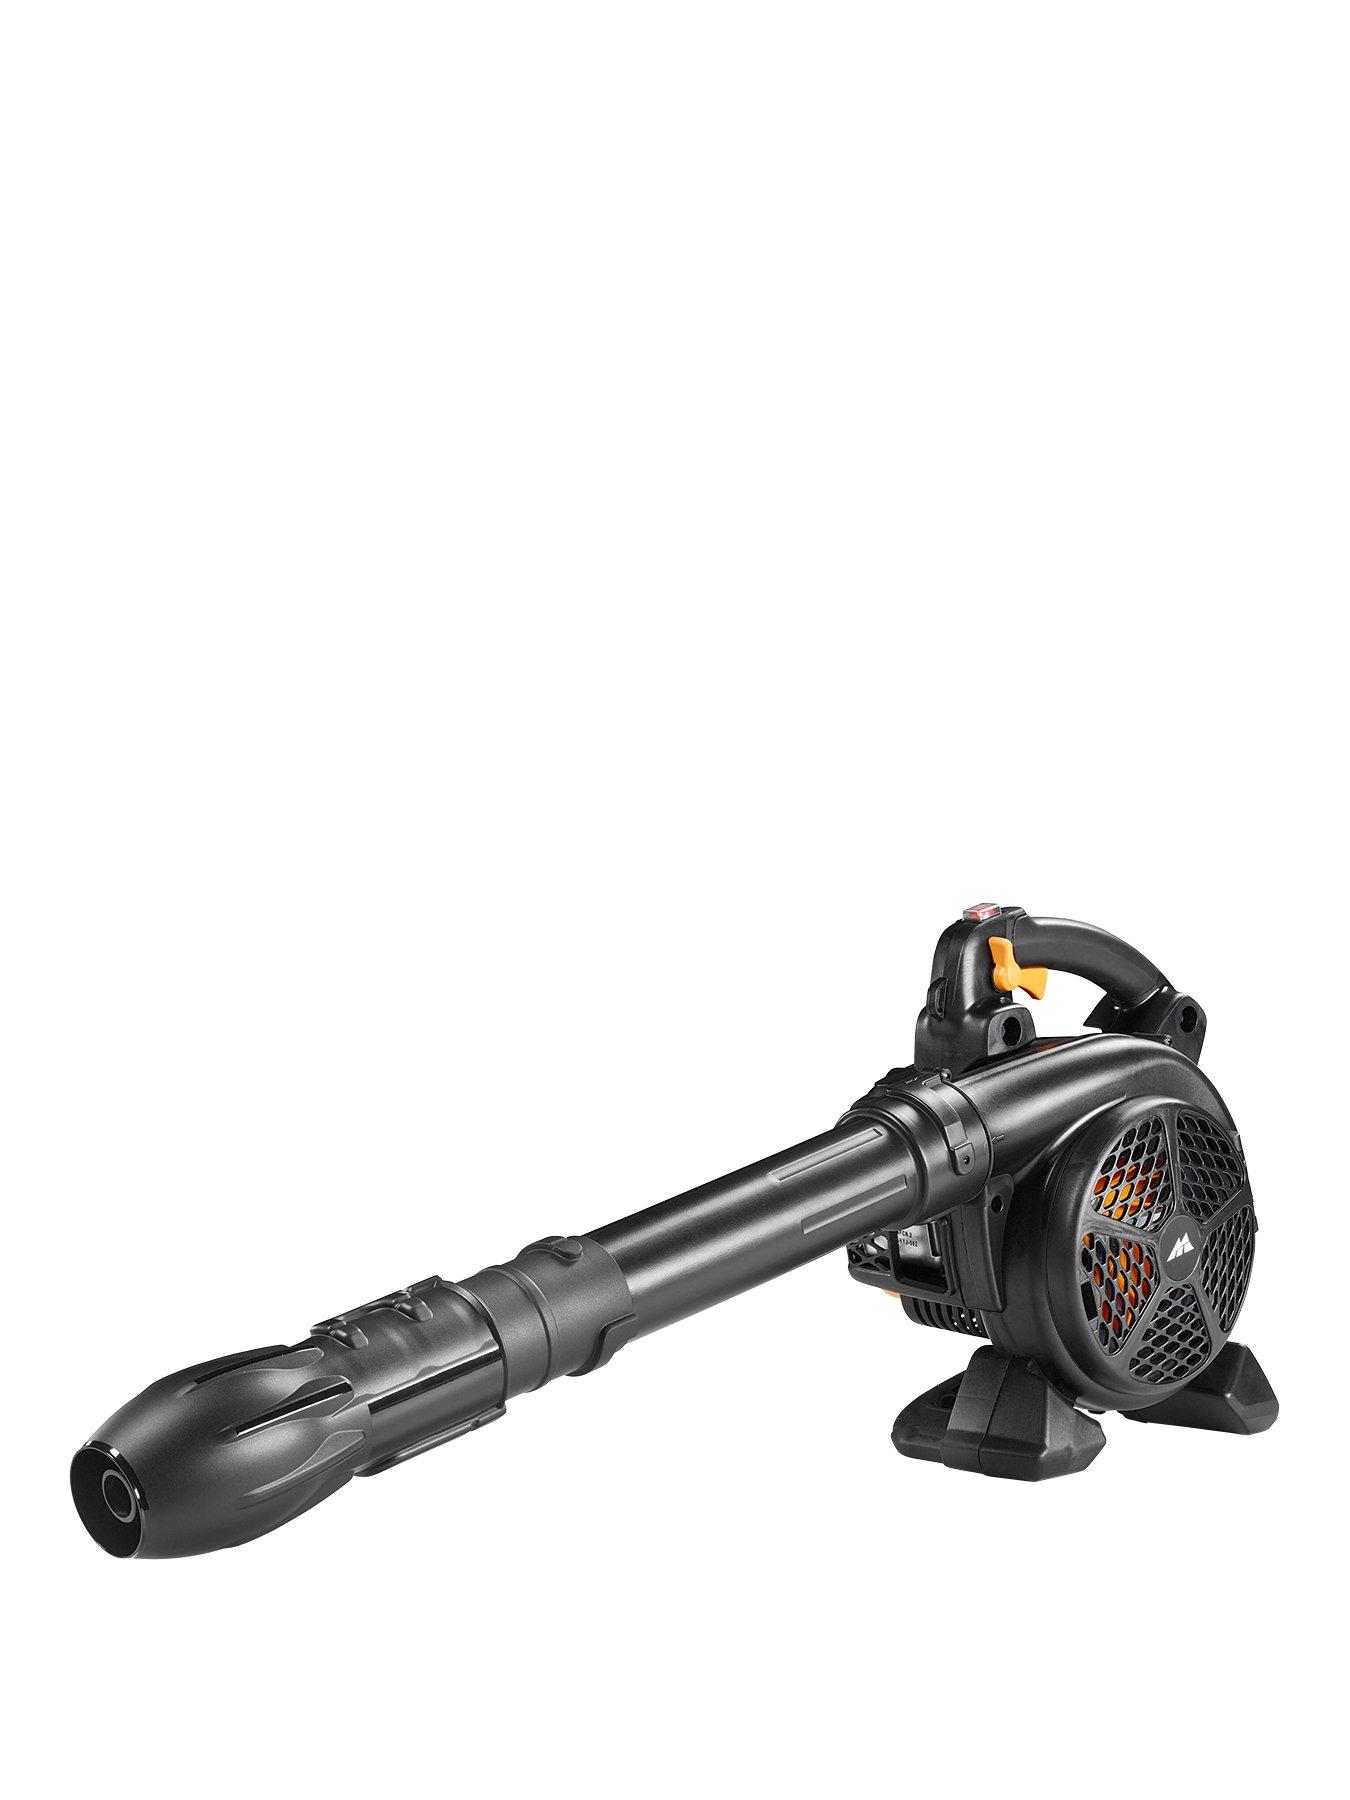 3-in-1 Electric Leaf Vacuum & Leaf Blower (2600 Watt, with Shredder, High  Blowing Speed of 315 km/h, 40 L Collection Bag and Carry Strap for Patios,  Paths, Driveways) - Garden Tools - Black & Decker